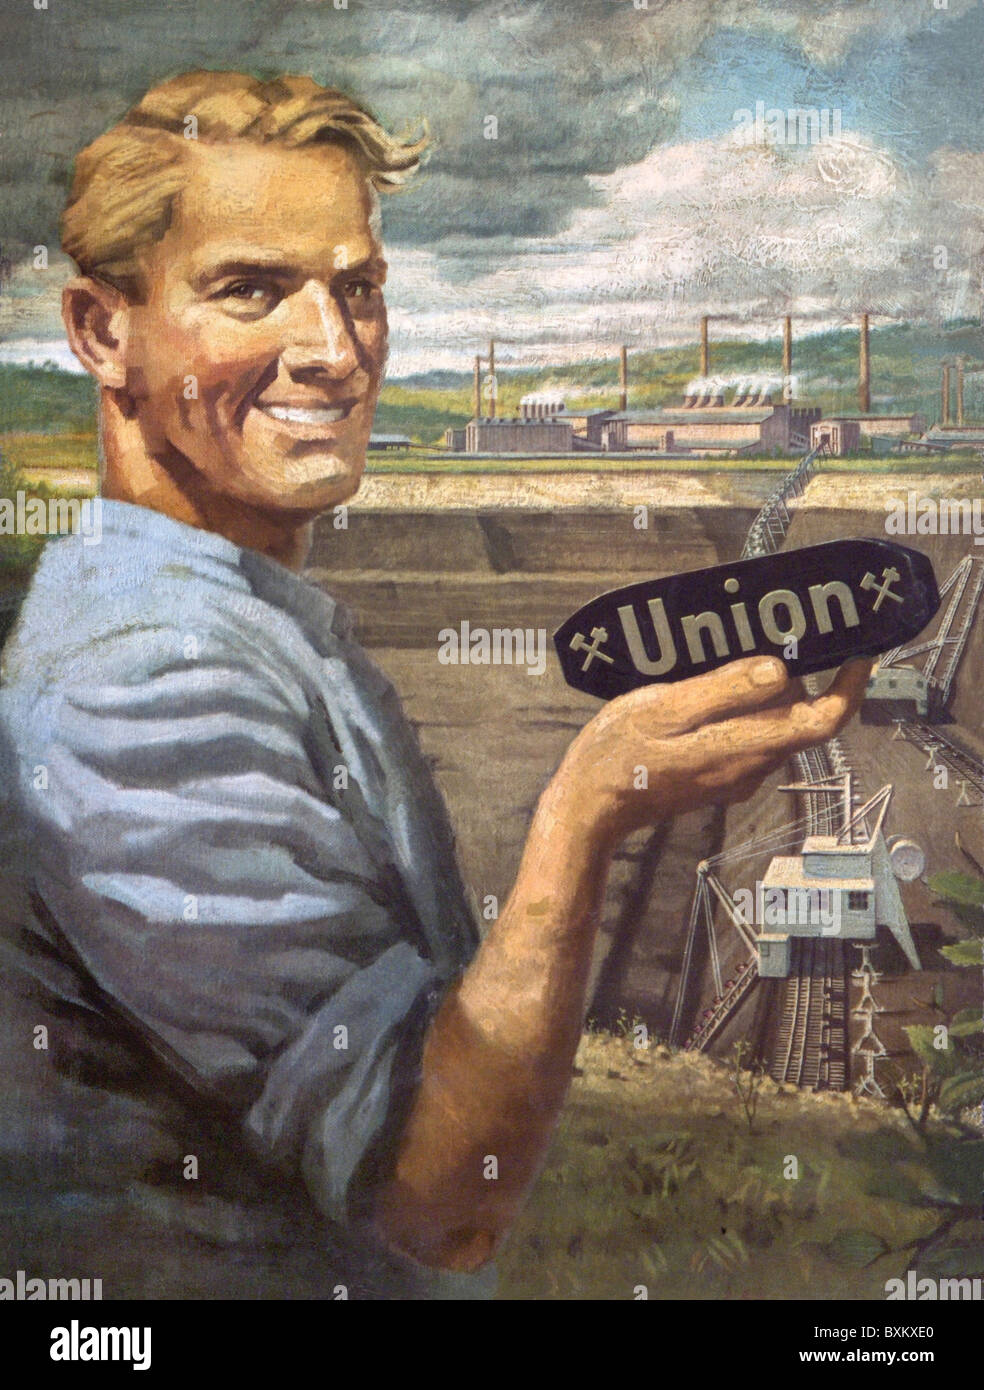 industry, mining, brown coal strip mine, Union briquette, Lausitz, poster, Germany, circa 1929, Additional-Rights-Clearences-Not Available Stock Photo